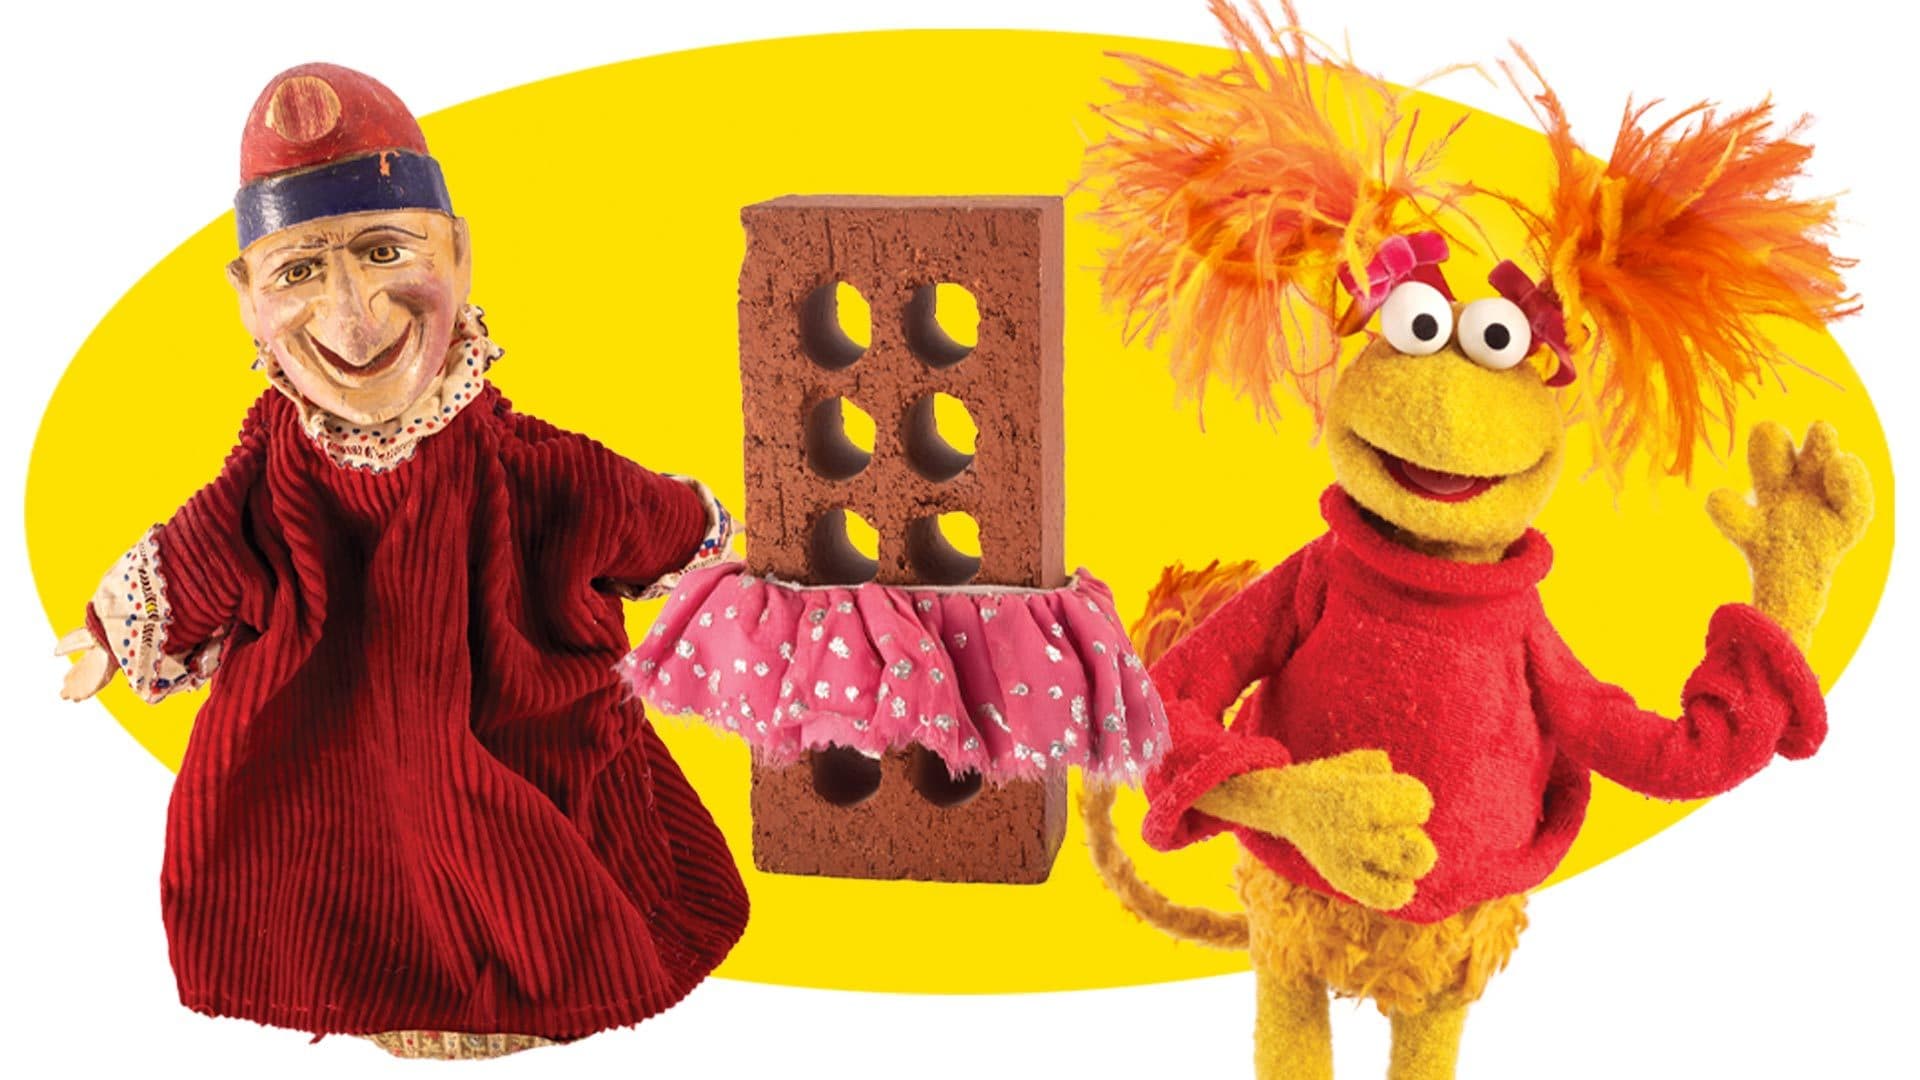 Punch, brick and Fraggle puppets